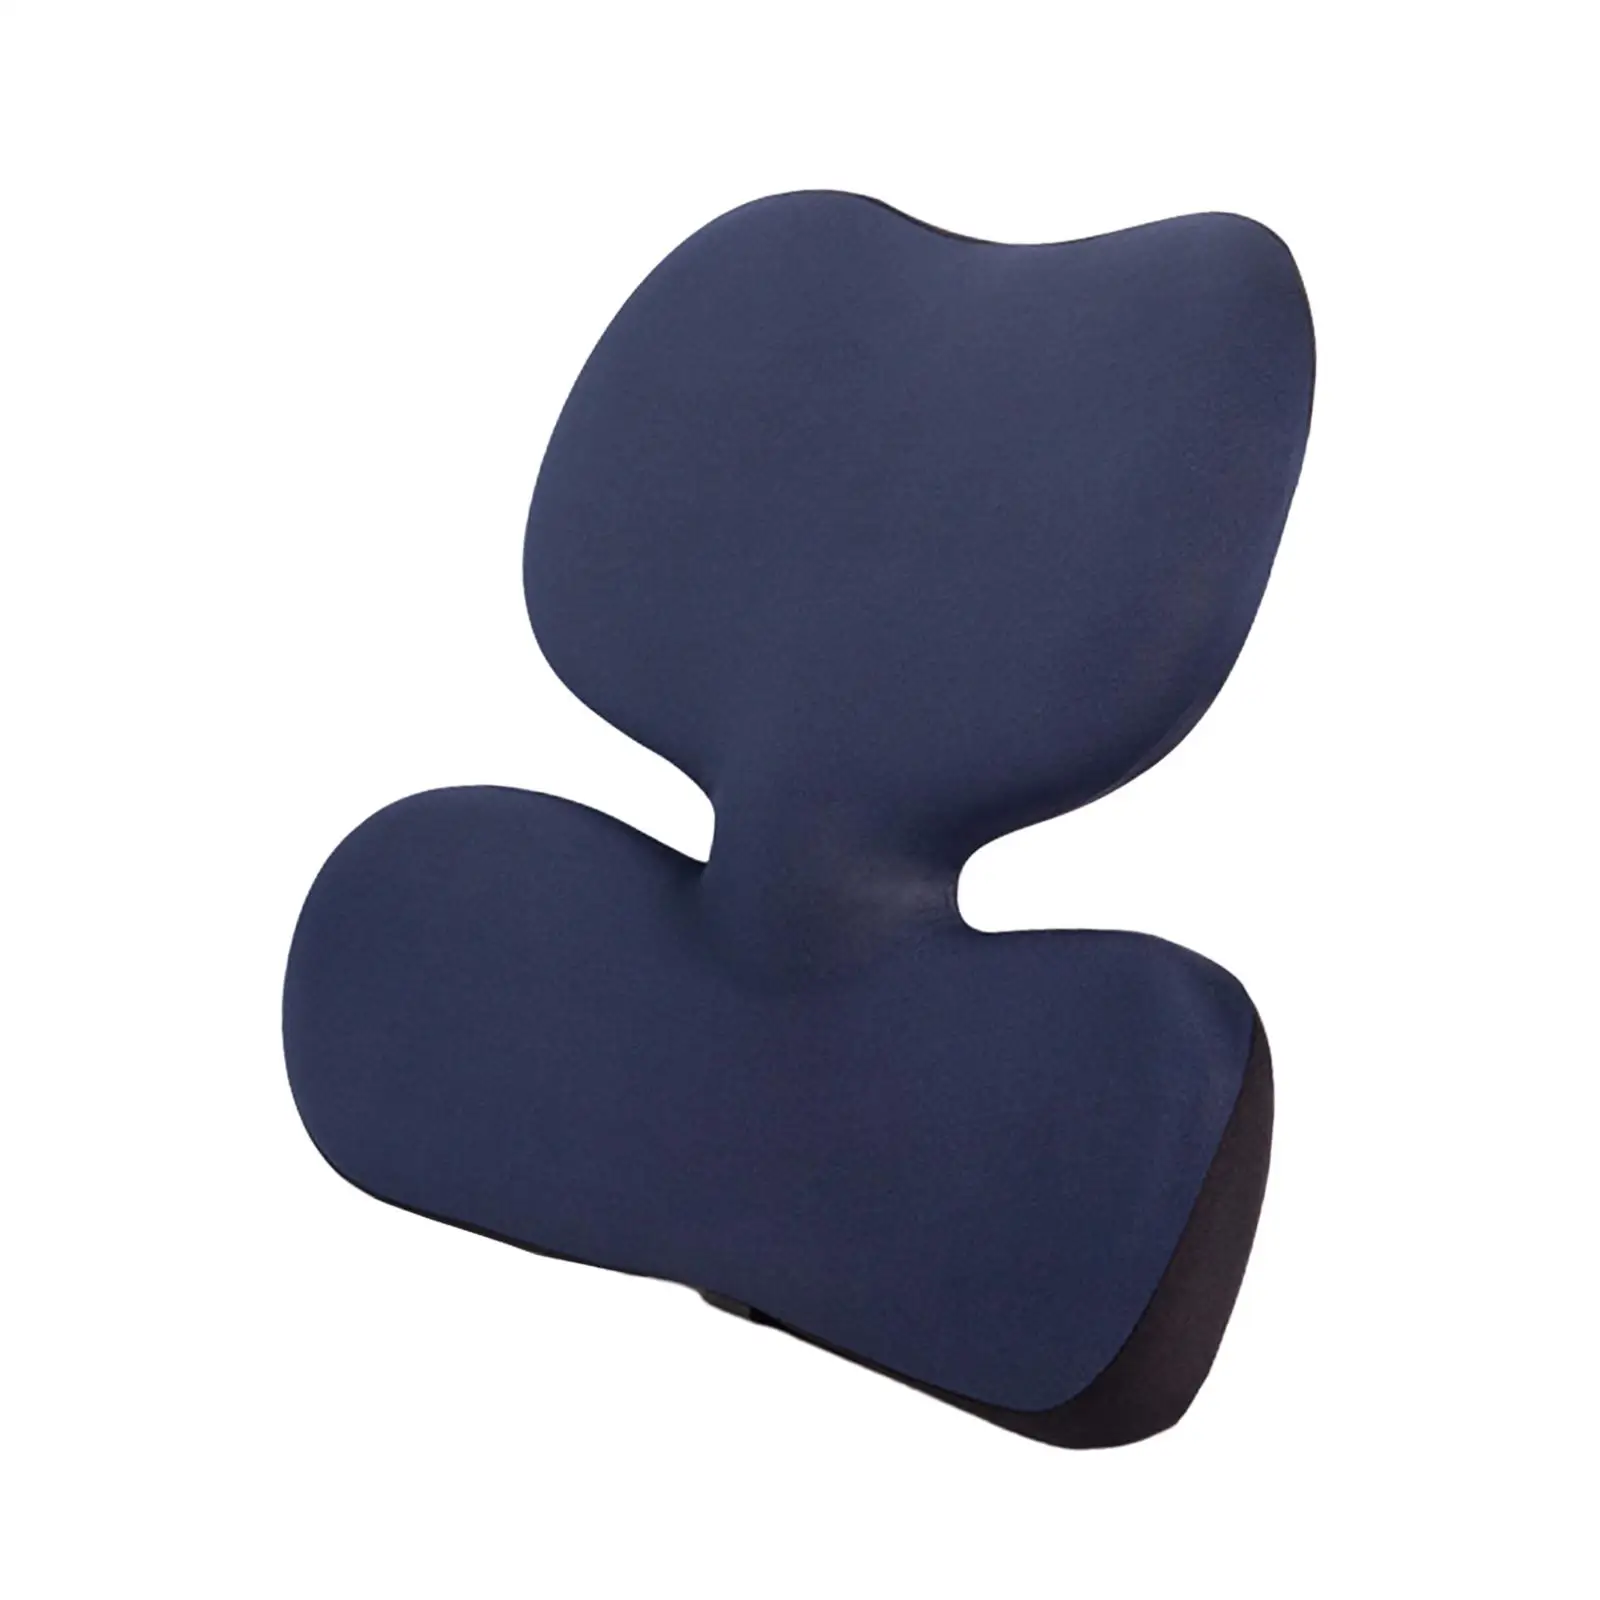 Lumbar Support Pillow Comfortable Soft Back Cushion Backrest Waist Cushion for Bedroom Gaming Chair Livingroom Sofa Dormitory